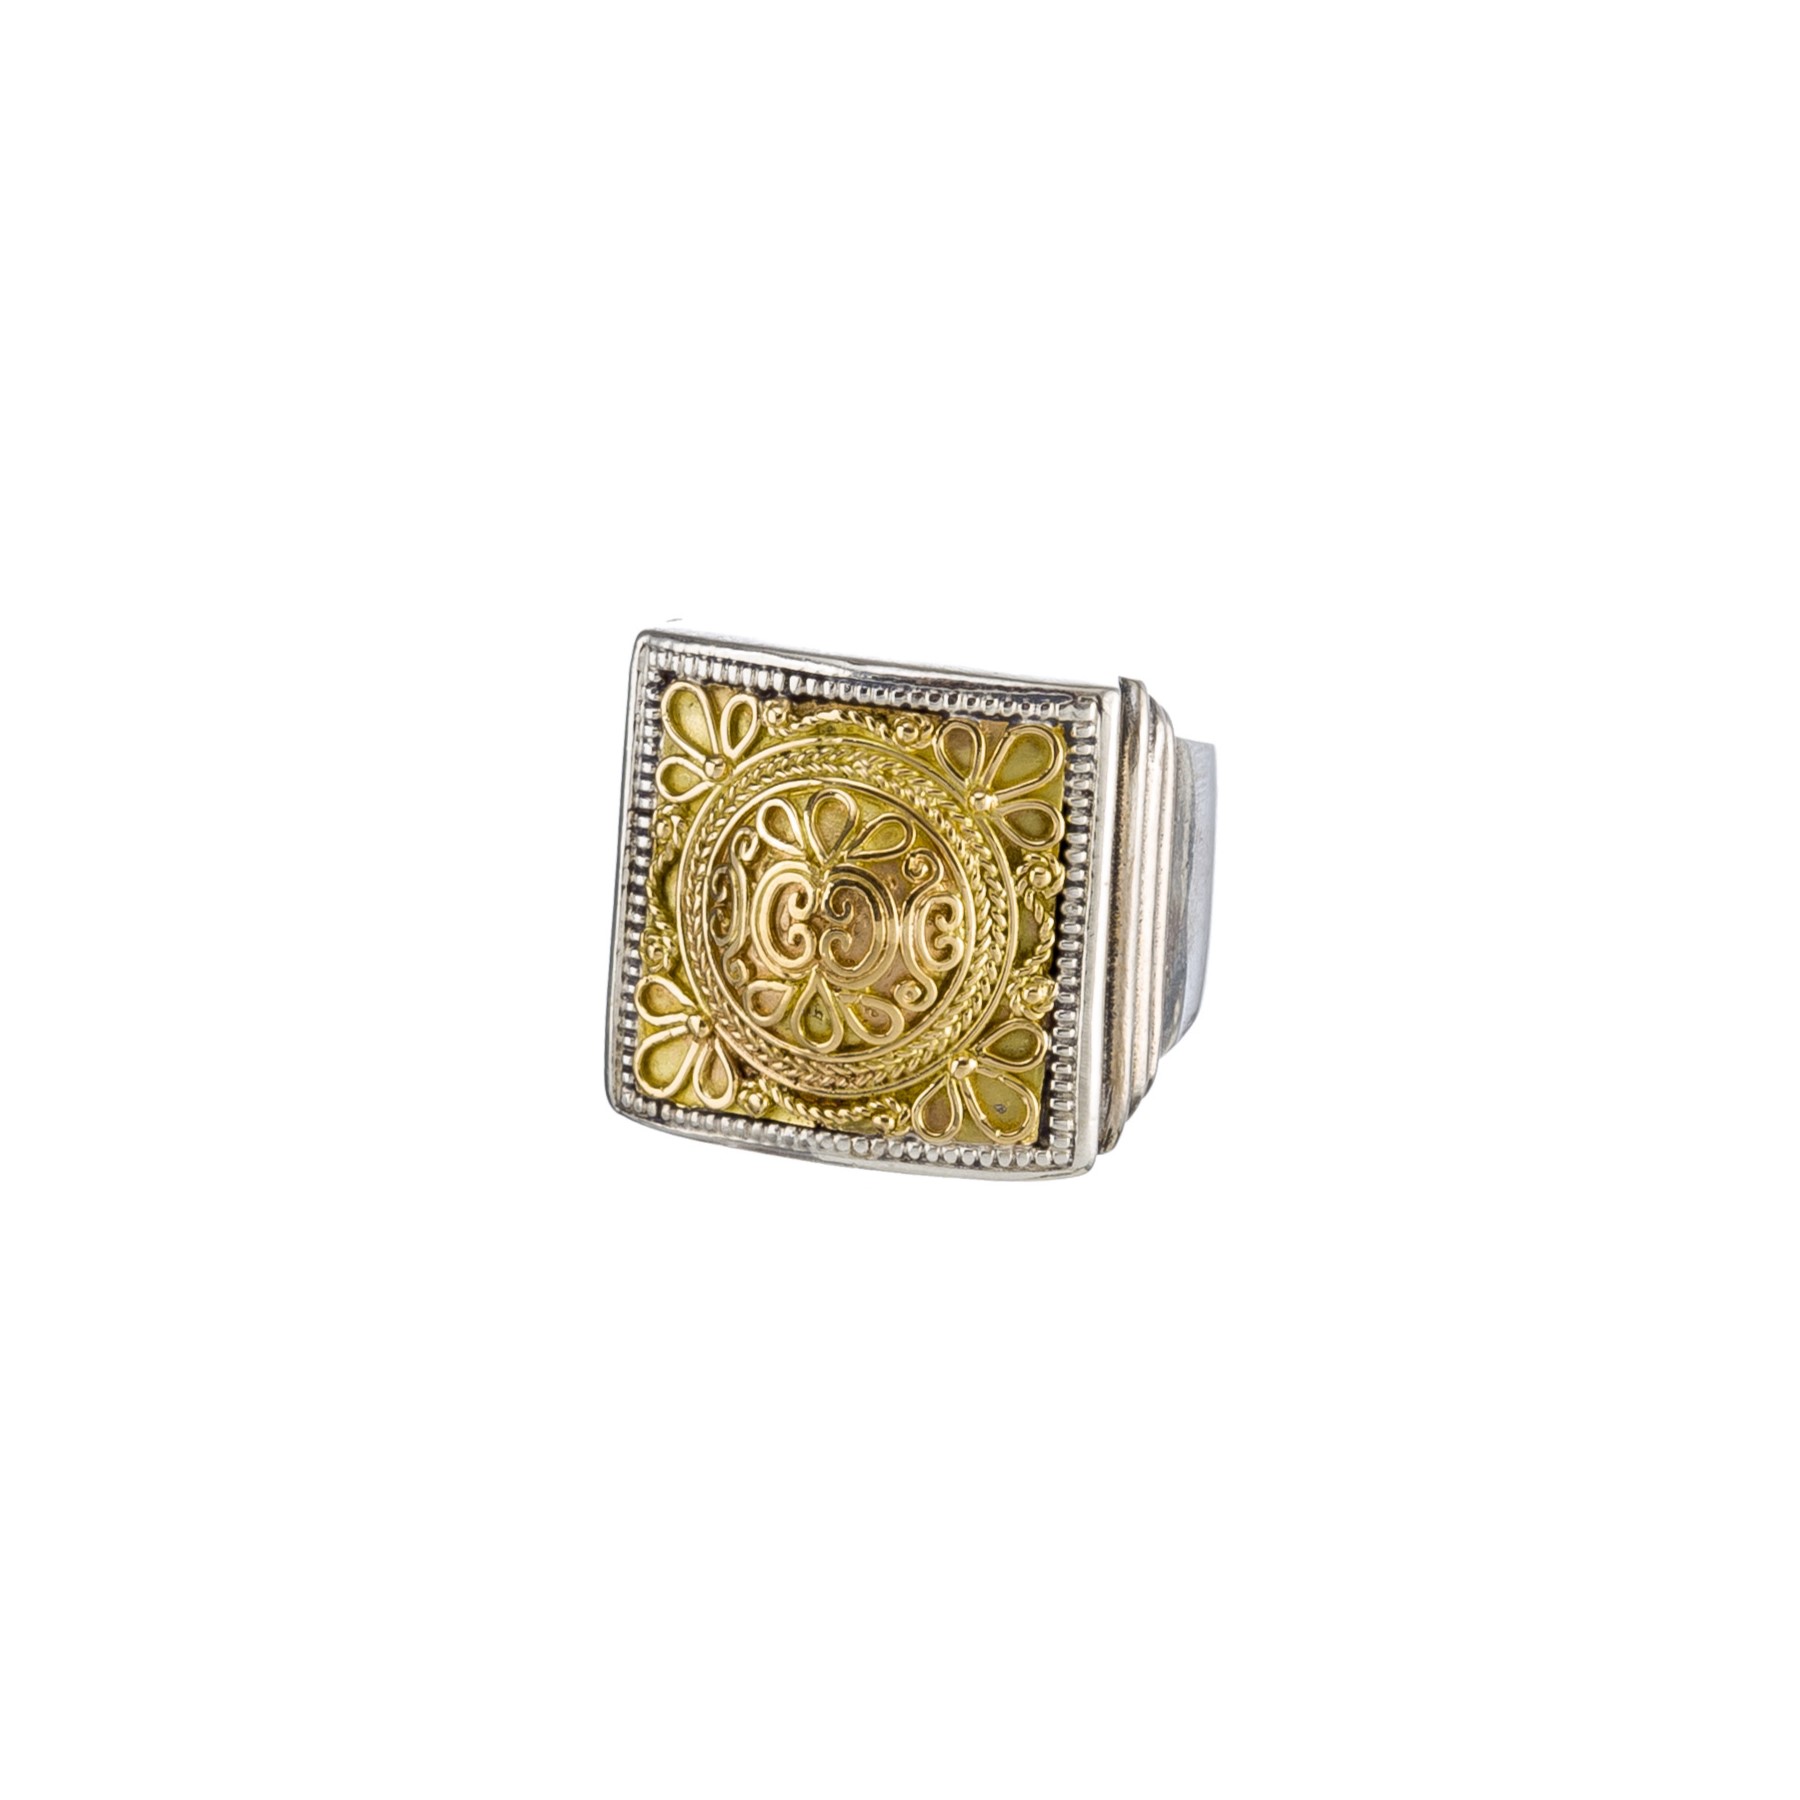 Classic square ring in 18K Gold and Sterling Silver